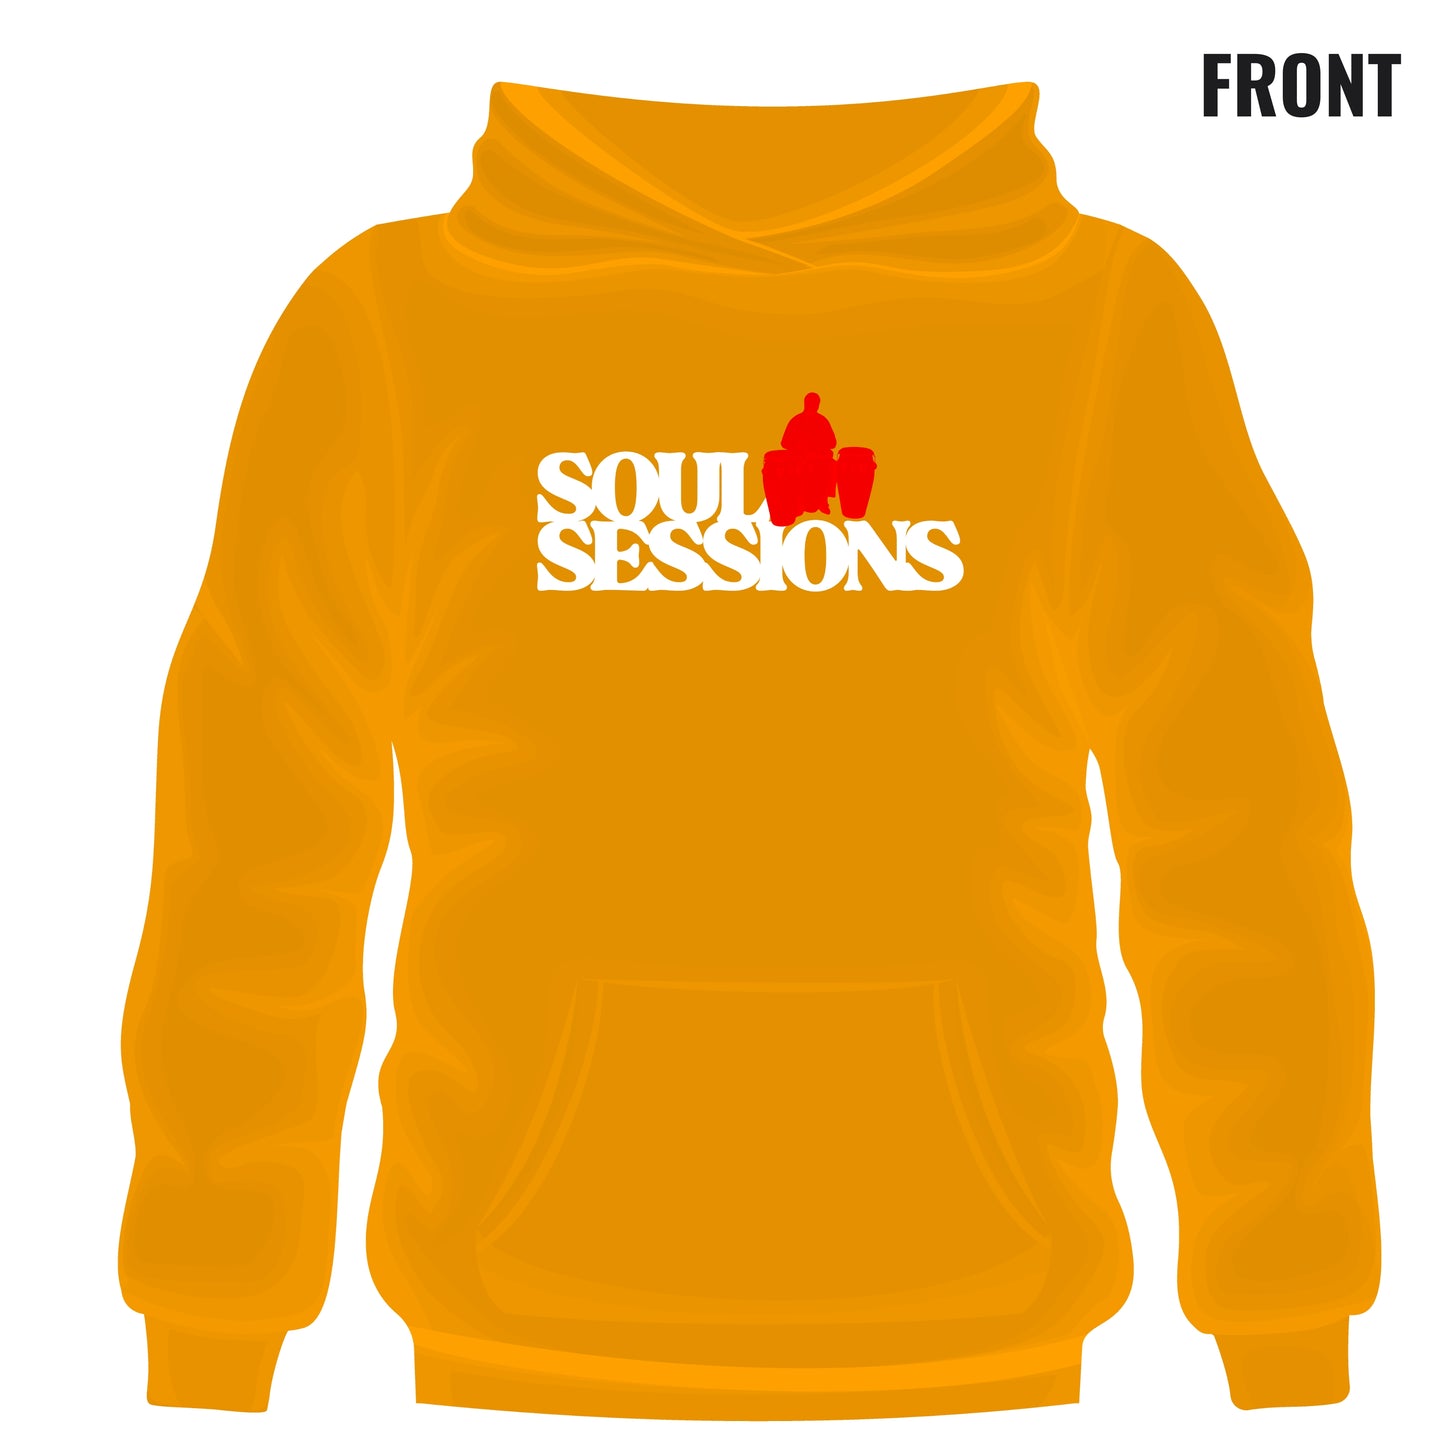 The Soul Sessions Hoodie